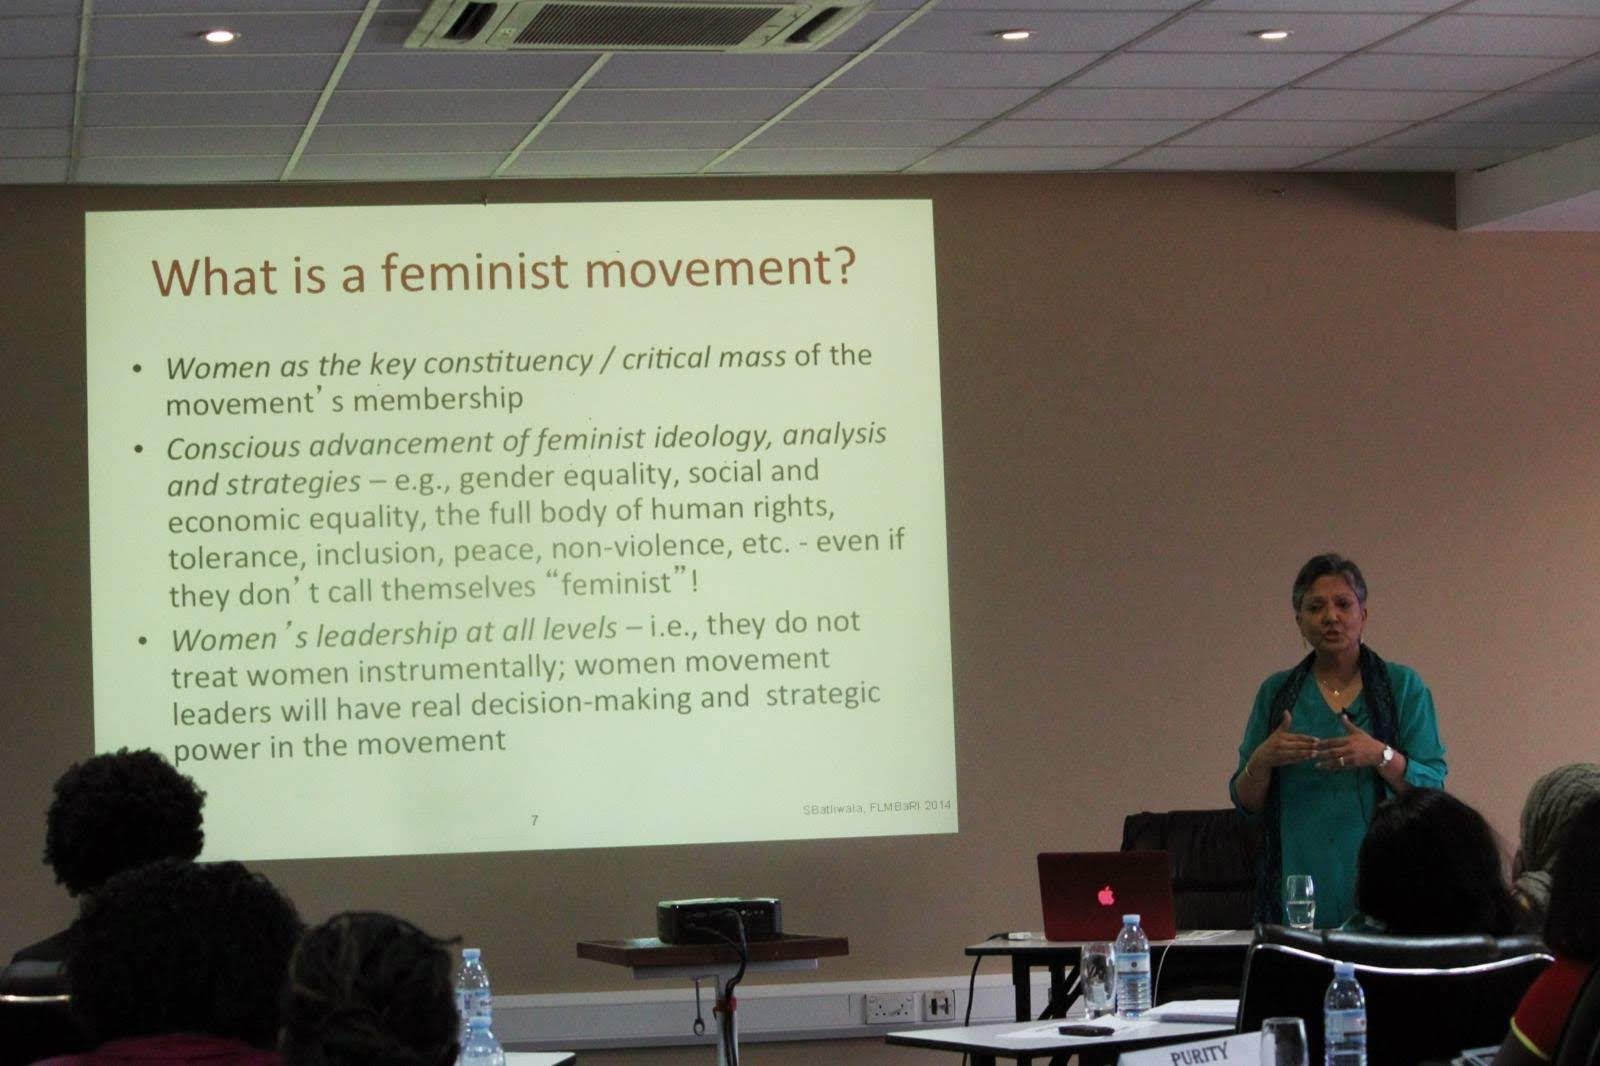 What is a feminist movement?